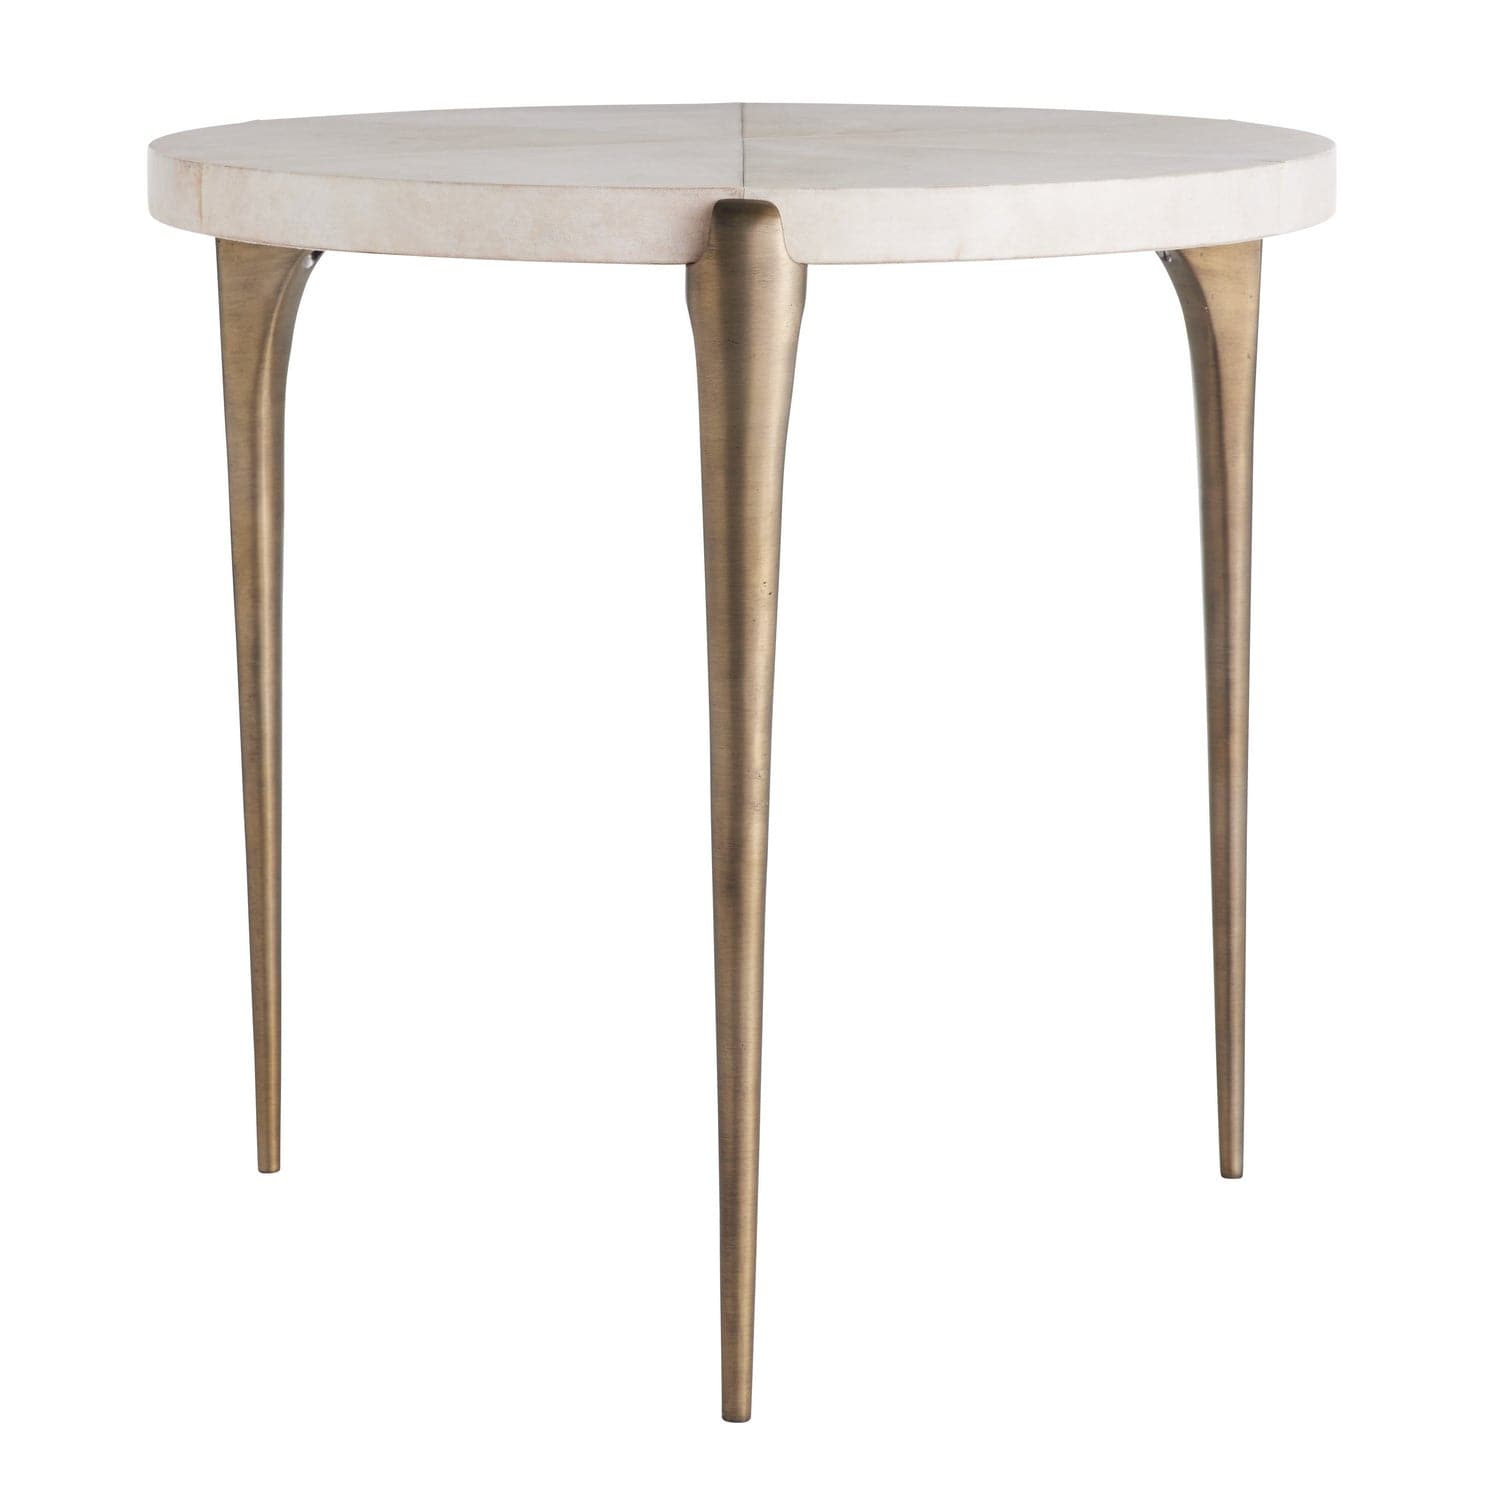 Side Table from the June collection in Natural finish